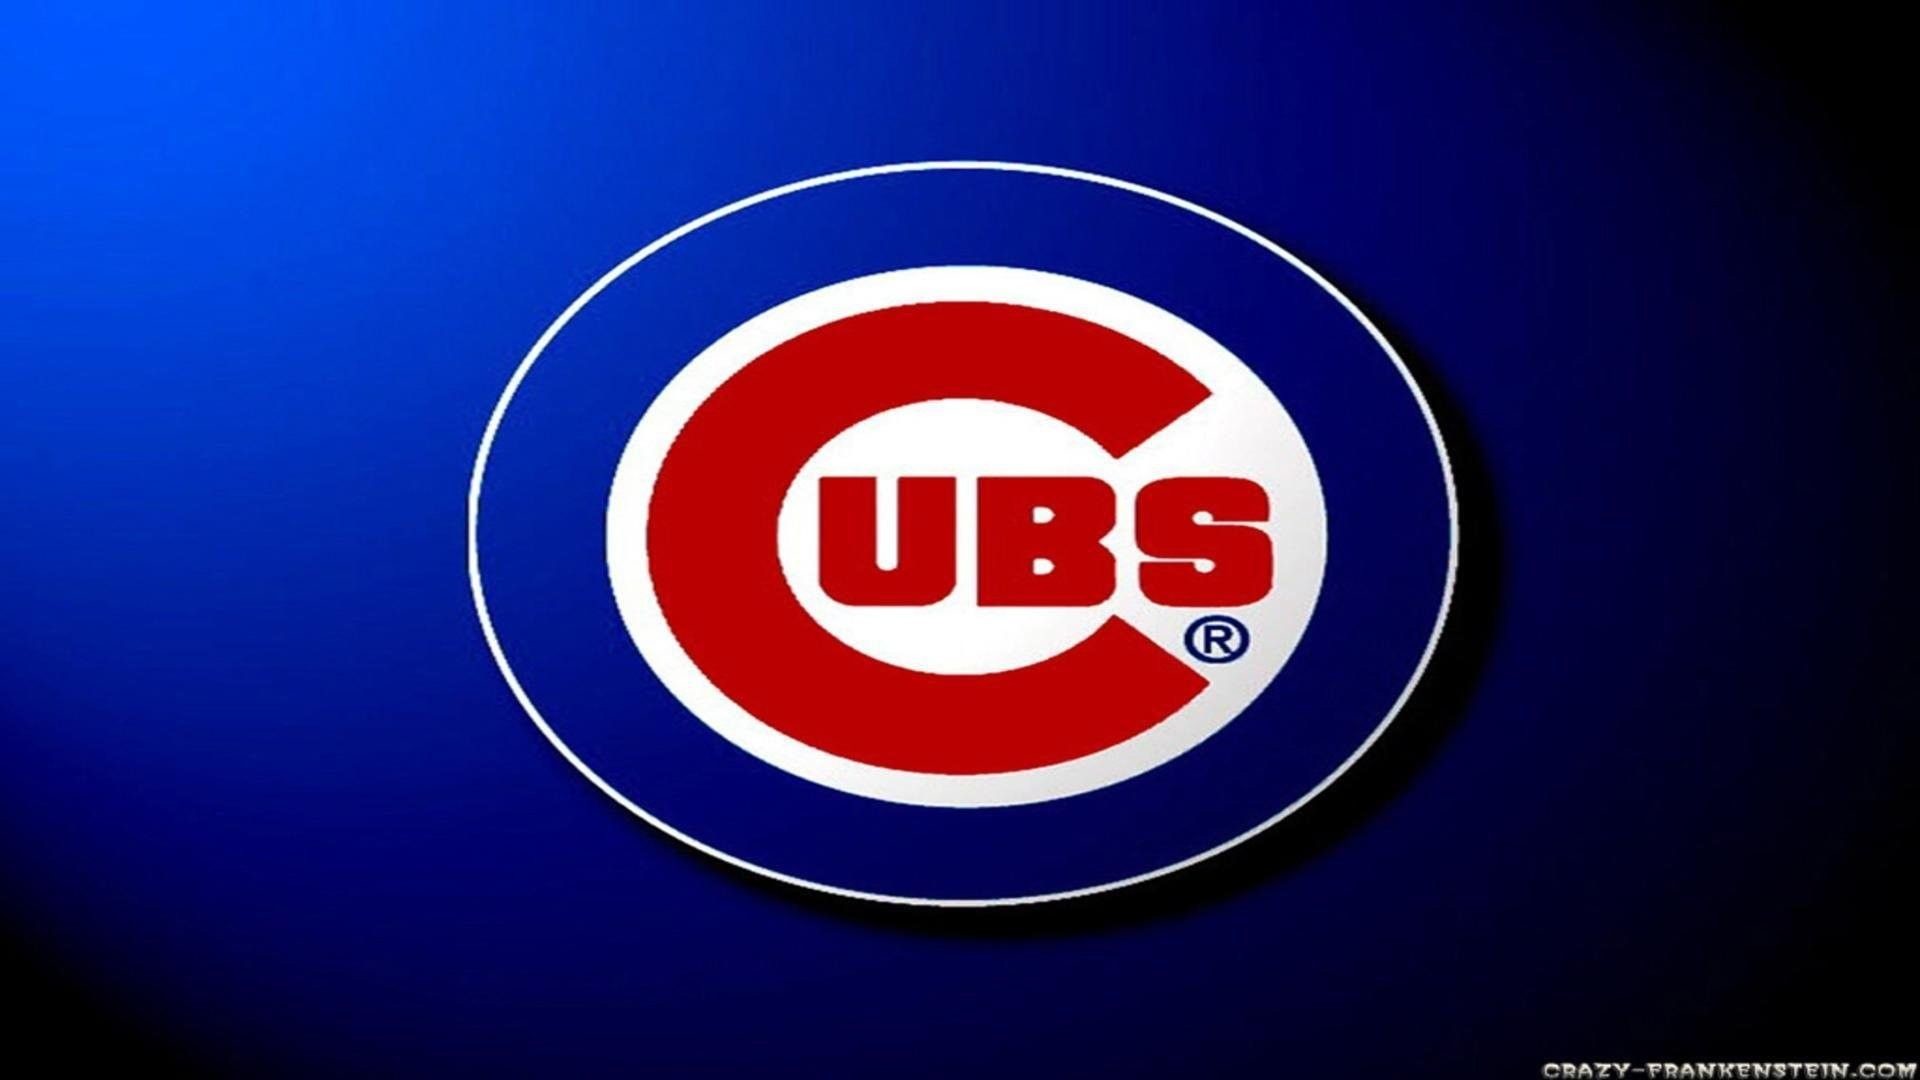 1920x1080 Chicago Cubs 2018 Wallpaper (72+ images)